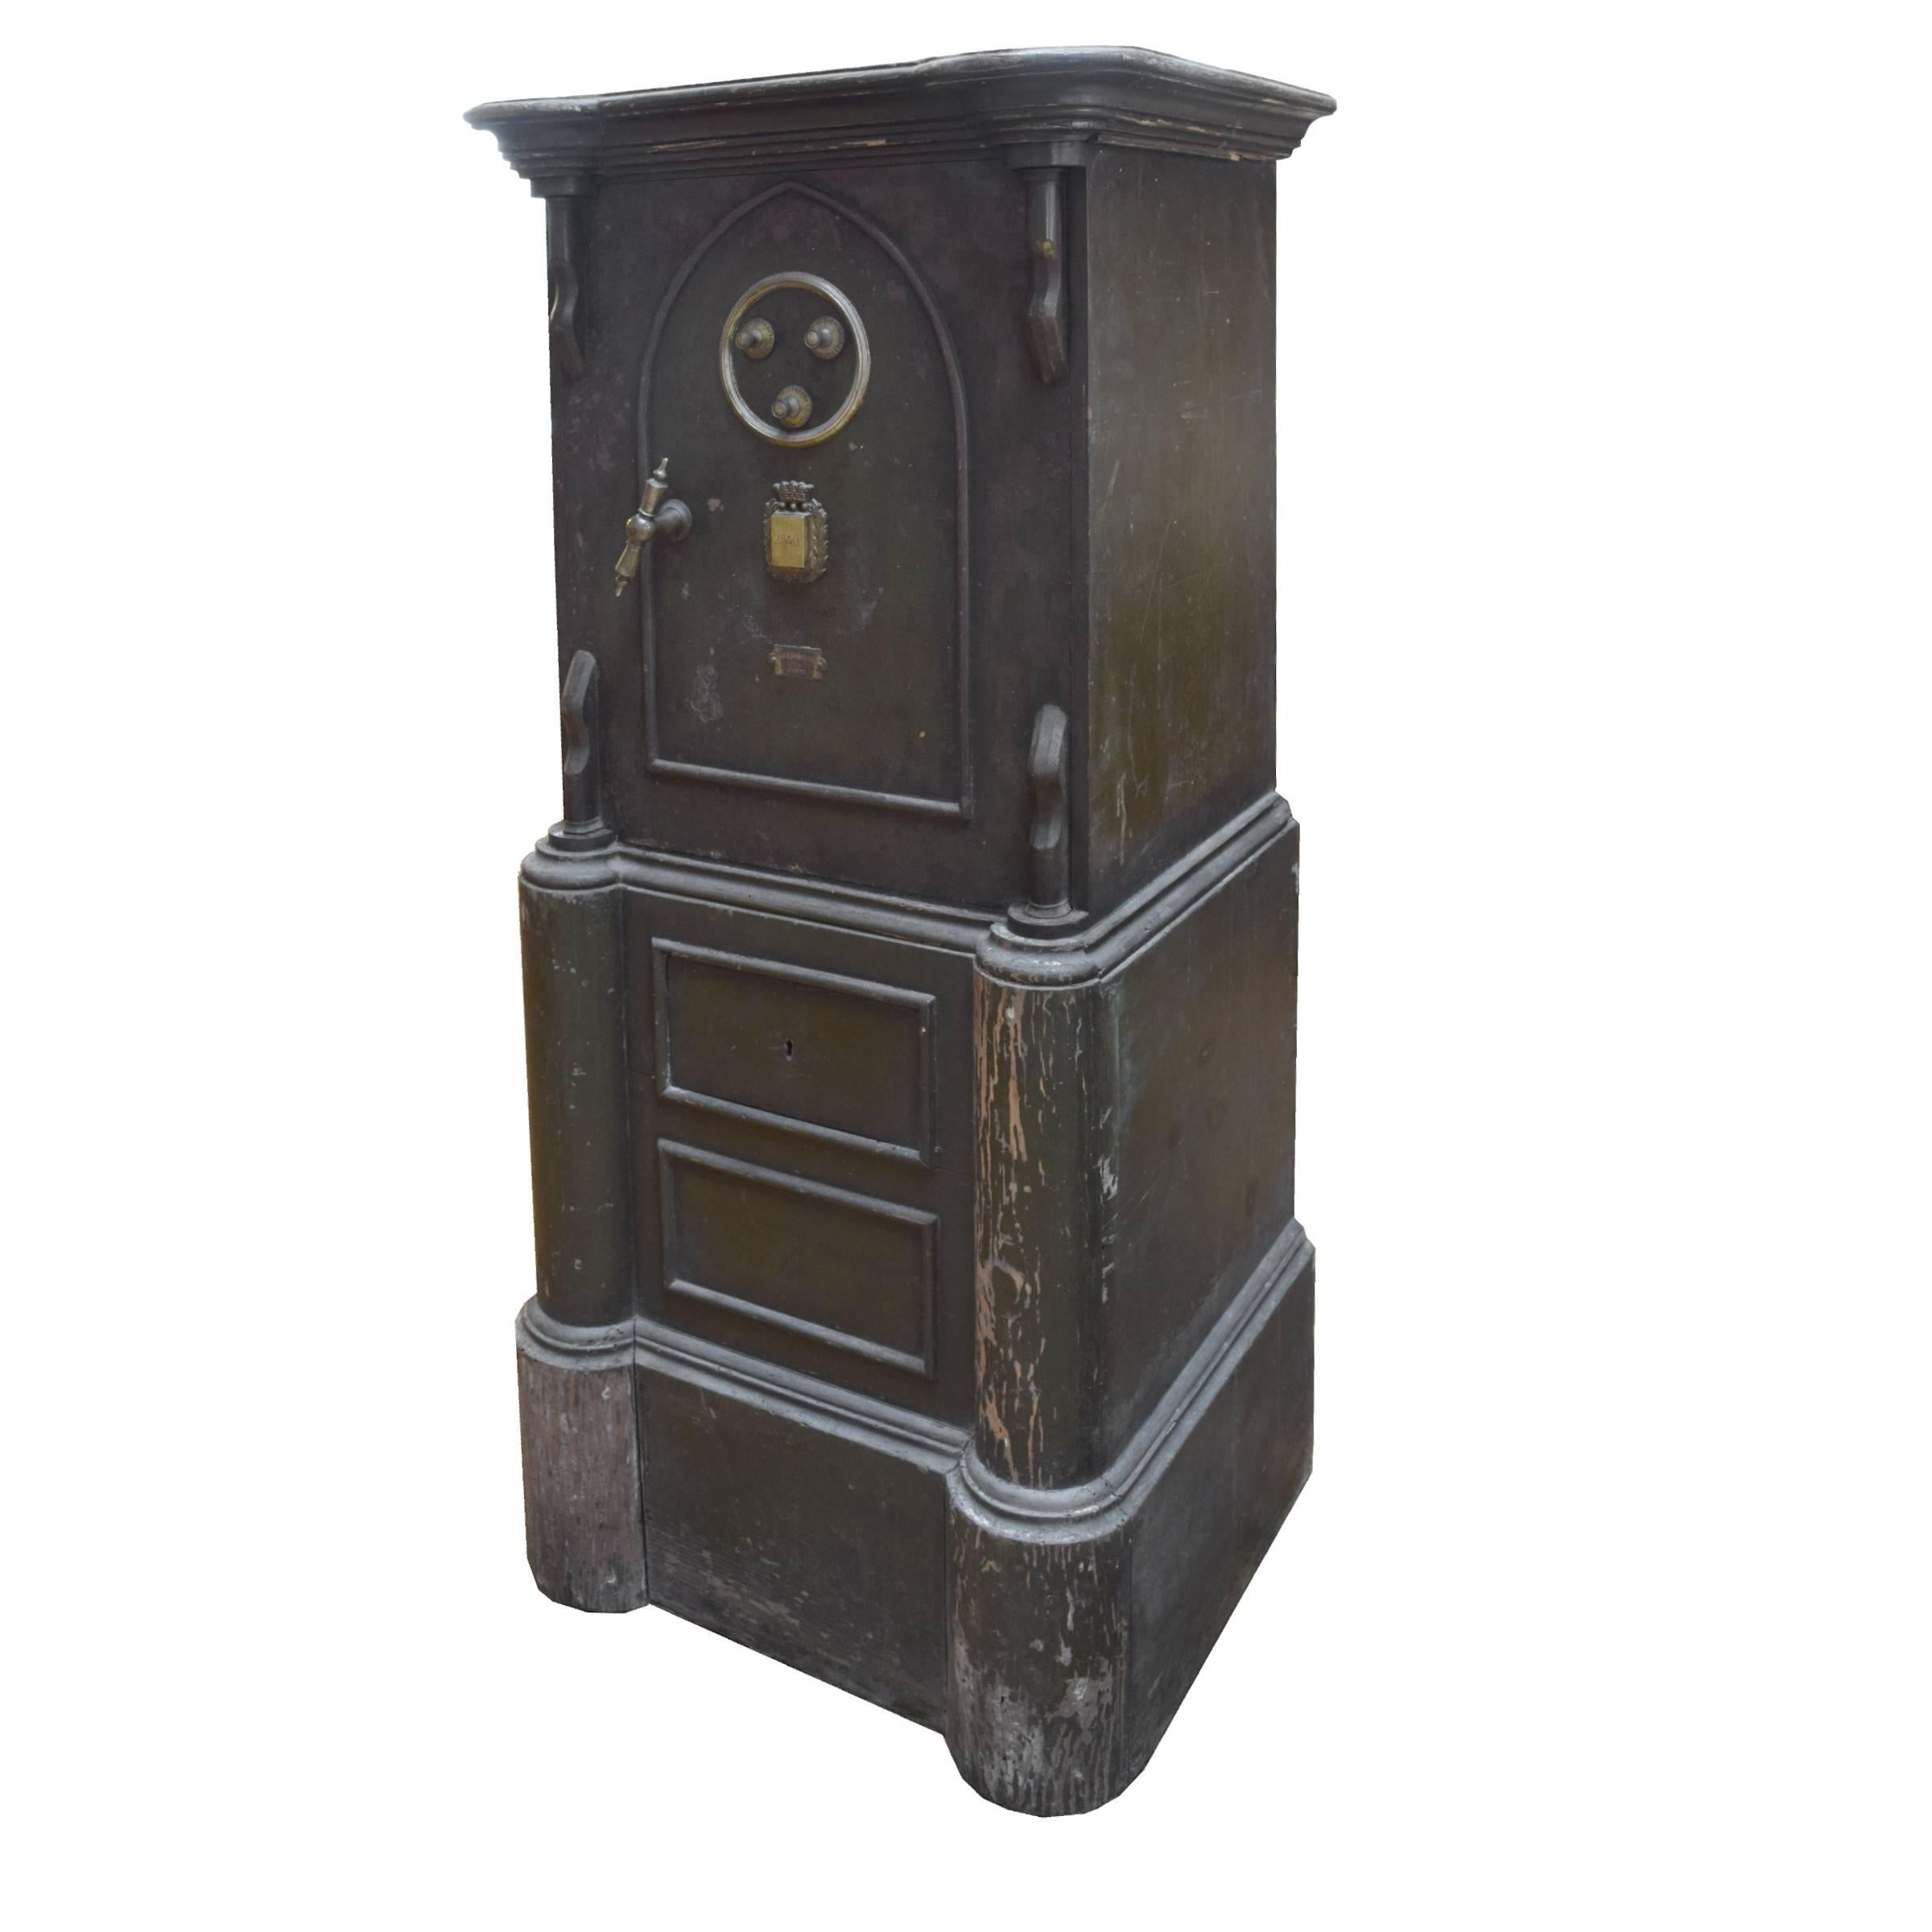 A very cool iron Spanish safe with a brass handle and three letter combination dials, with a wood top and a tall wood base, circa 1900.